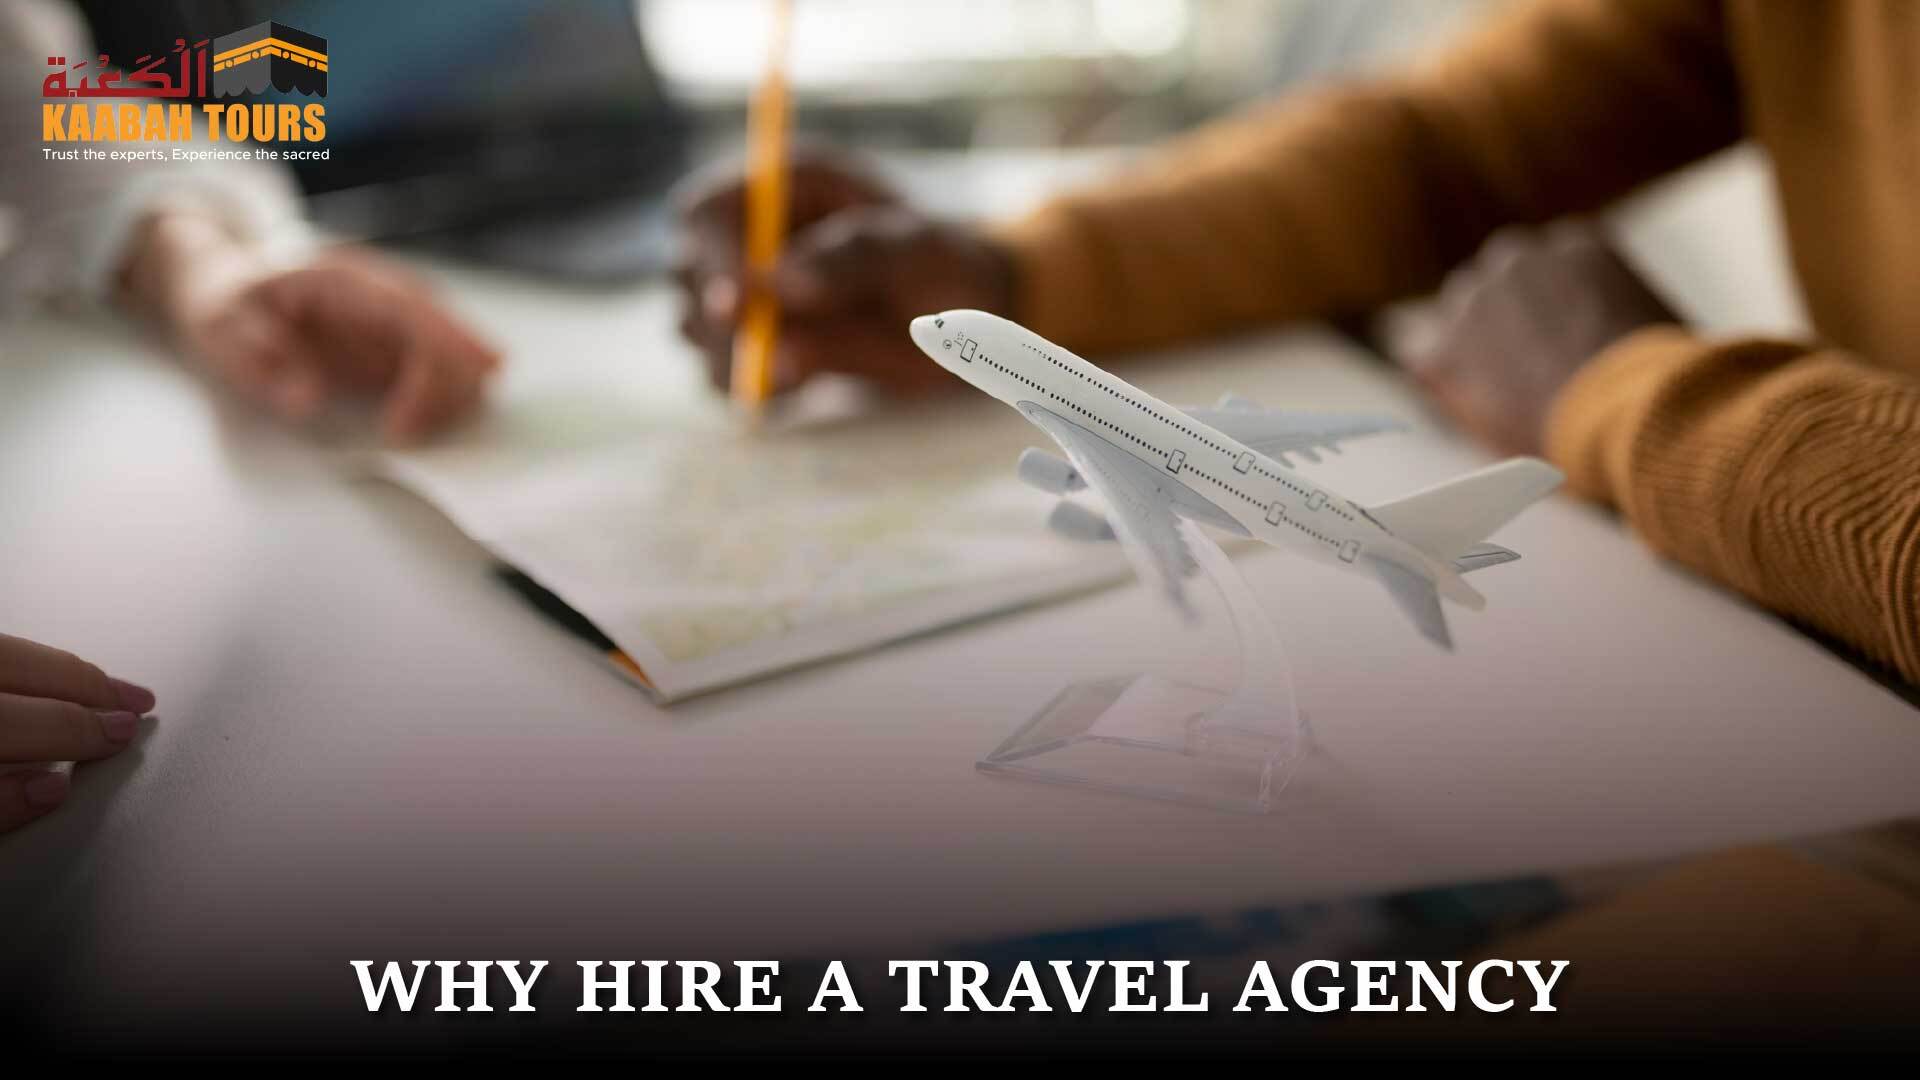 Hire a Travel Agency